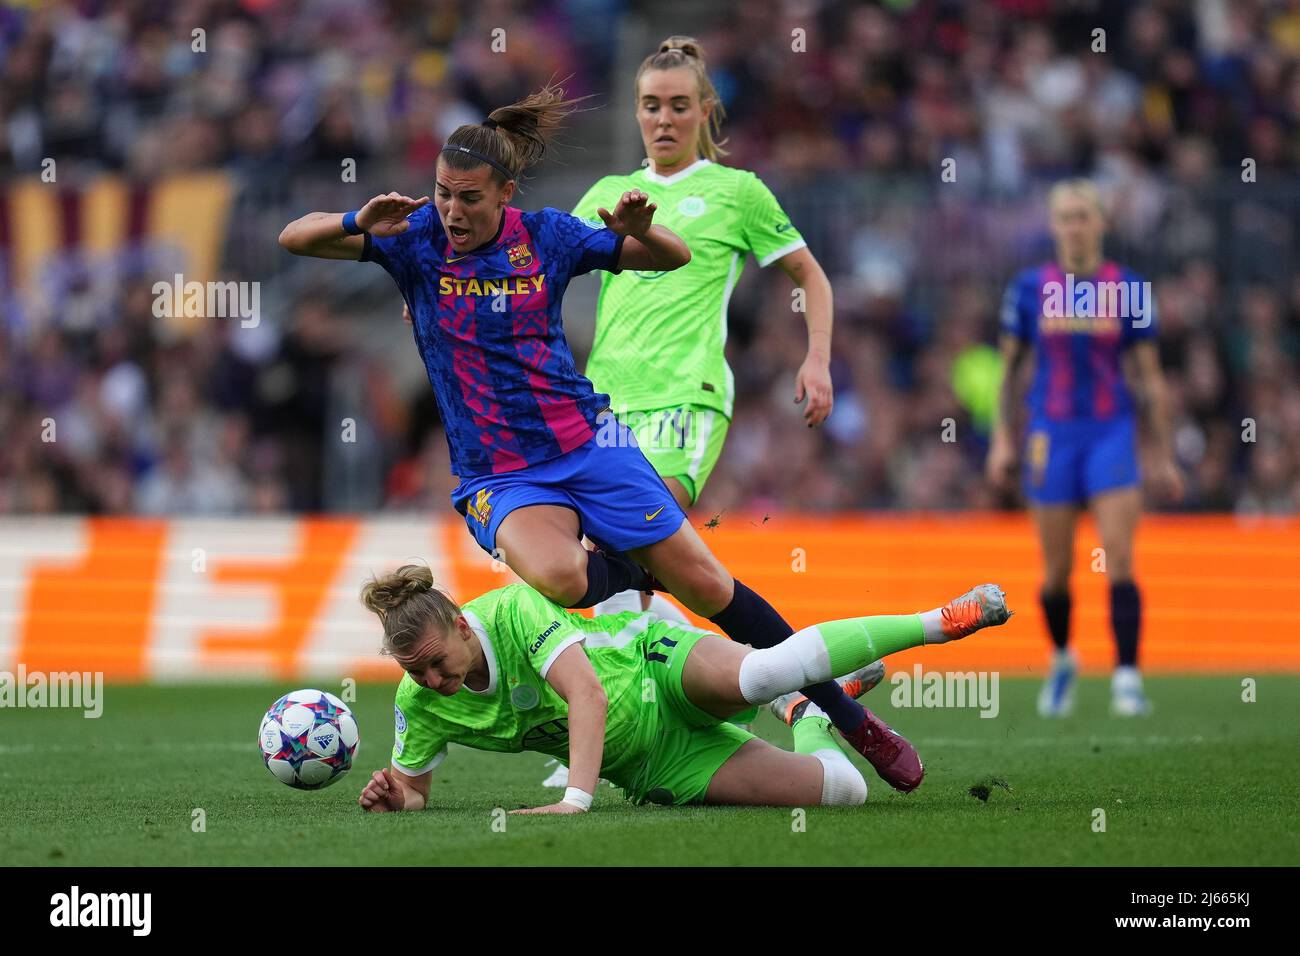 Mariona Caldentey of FC Barcelona and Alexandra Popp of VFL Wolfsburg during the UEFA Womens Champions League, Semi Finals match between FC Barcelona and VFL Wolfsburg played at Camp Nou Stadium on April 22, 2022 in Barcelona, Spain. (Photo by PRESSINPHOTO) Stock Photo